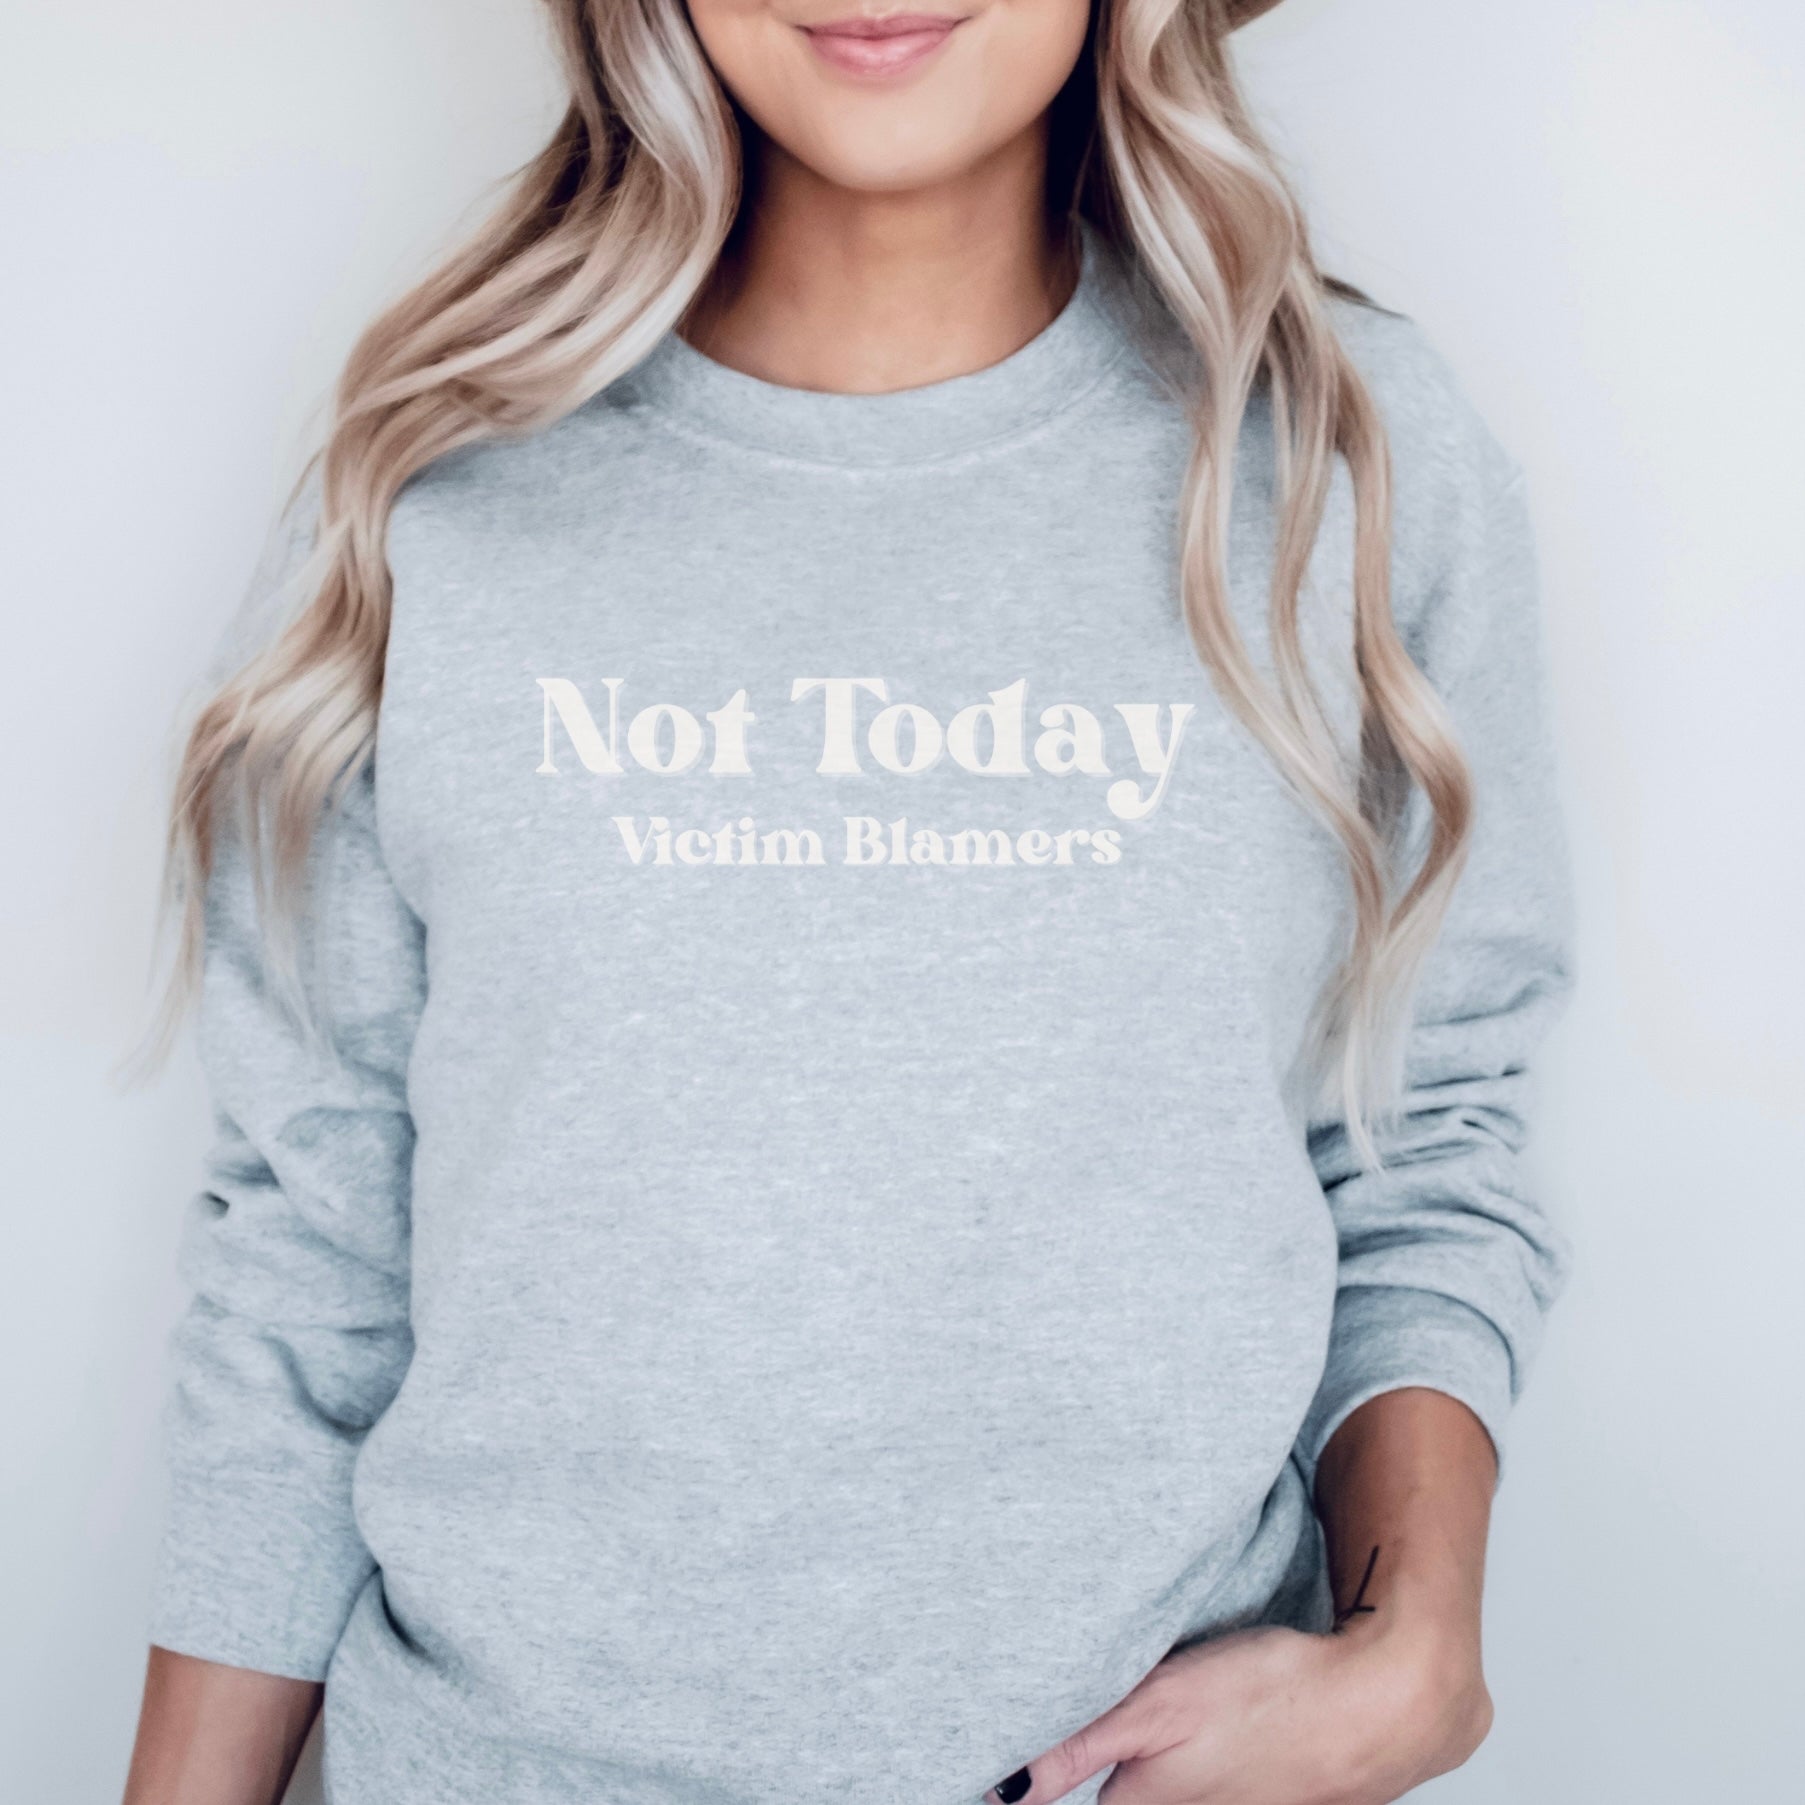 The front of the Sport Grey sweatshirt proudly displays the phrase "Not Today Victim Blamers" in a White bold and eye-catching font. This message serves as a reminder that we reject victim-blaming and support those who have faced injustice.